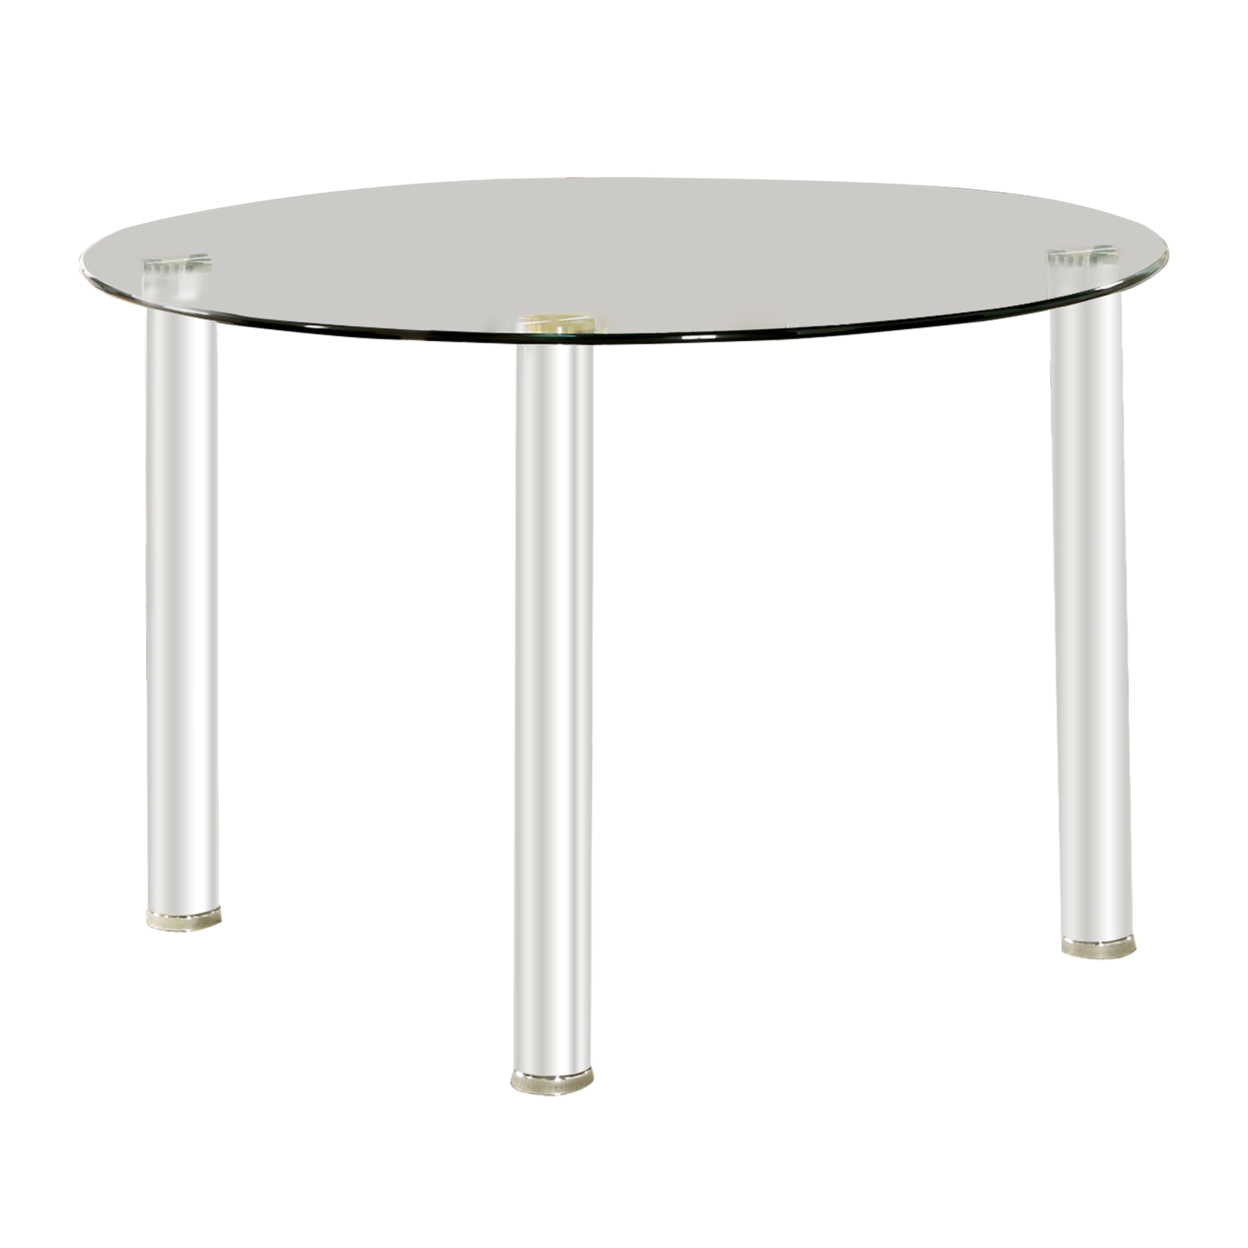 Contemporary Dining Table With Glass Top And Tubular Legs, Silver And Clear- Saltoro Sherpi